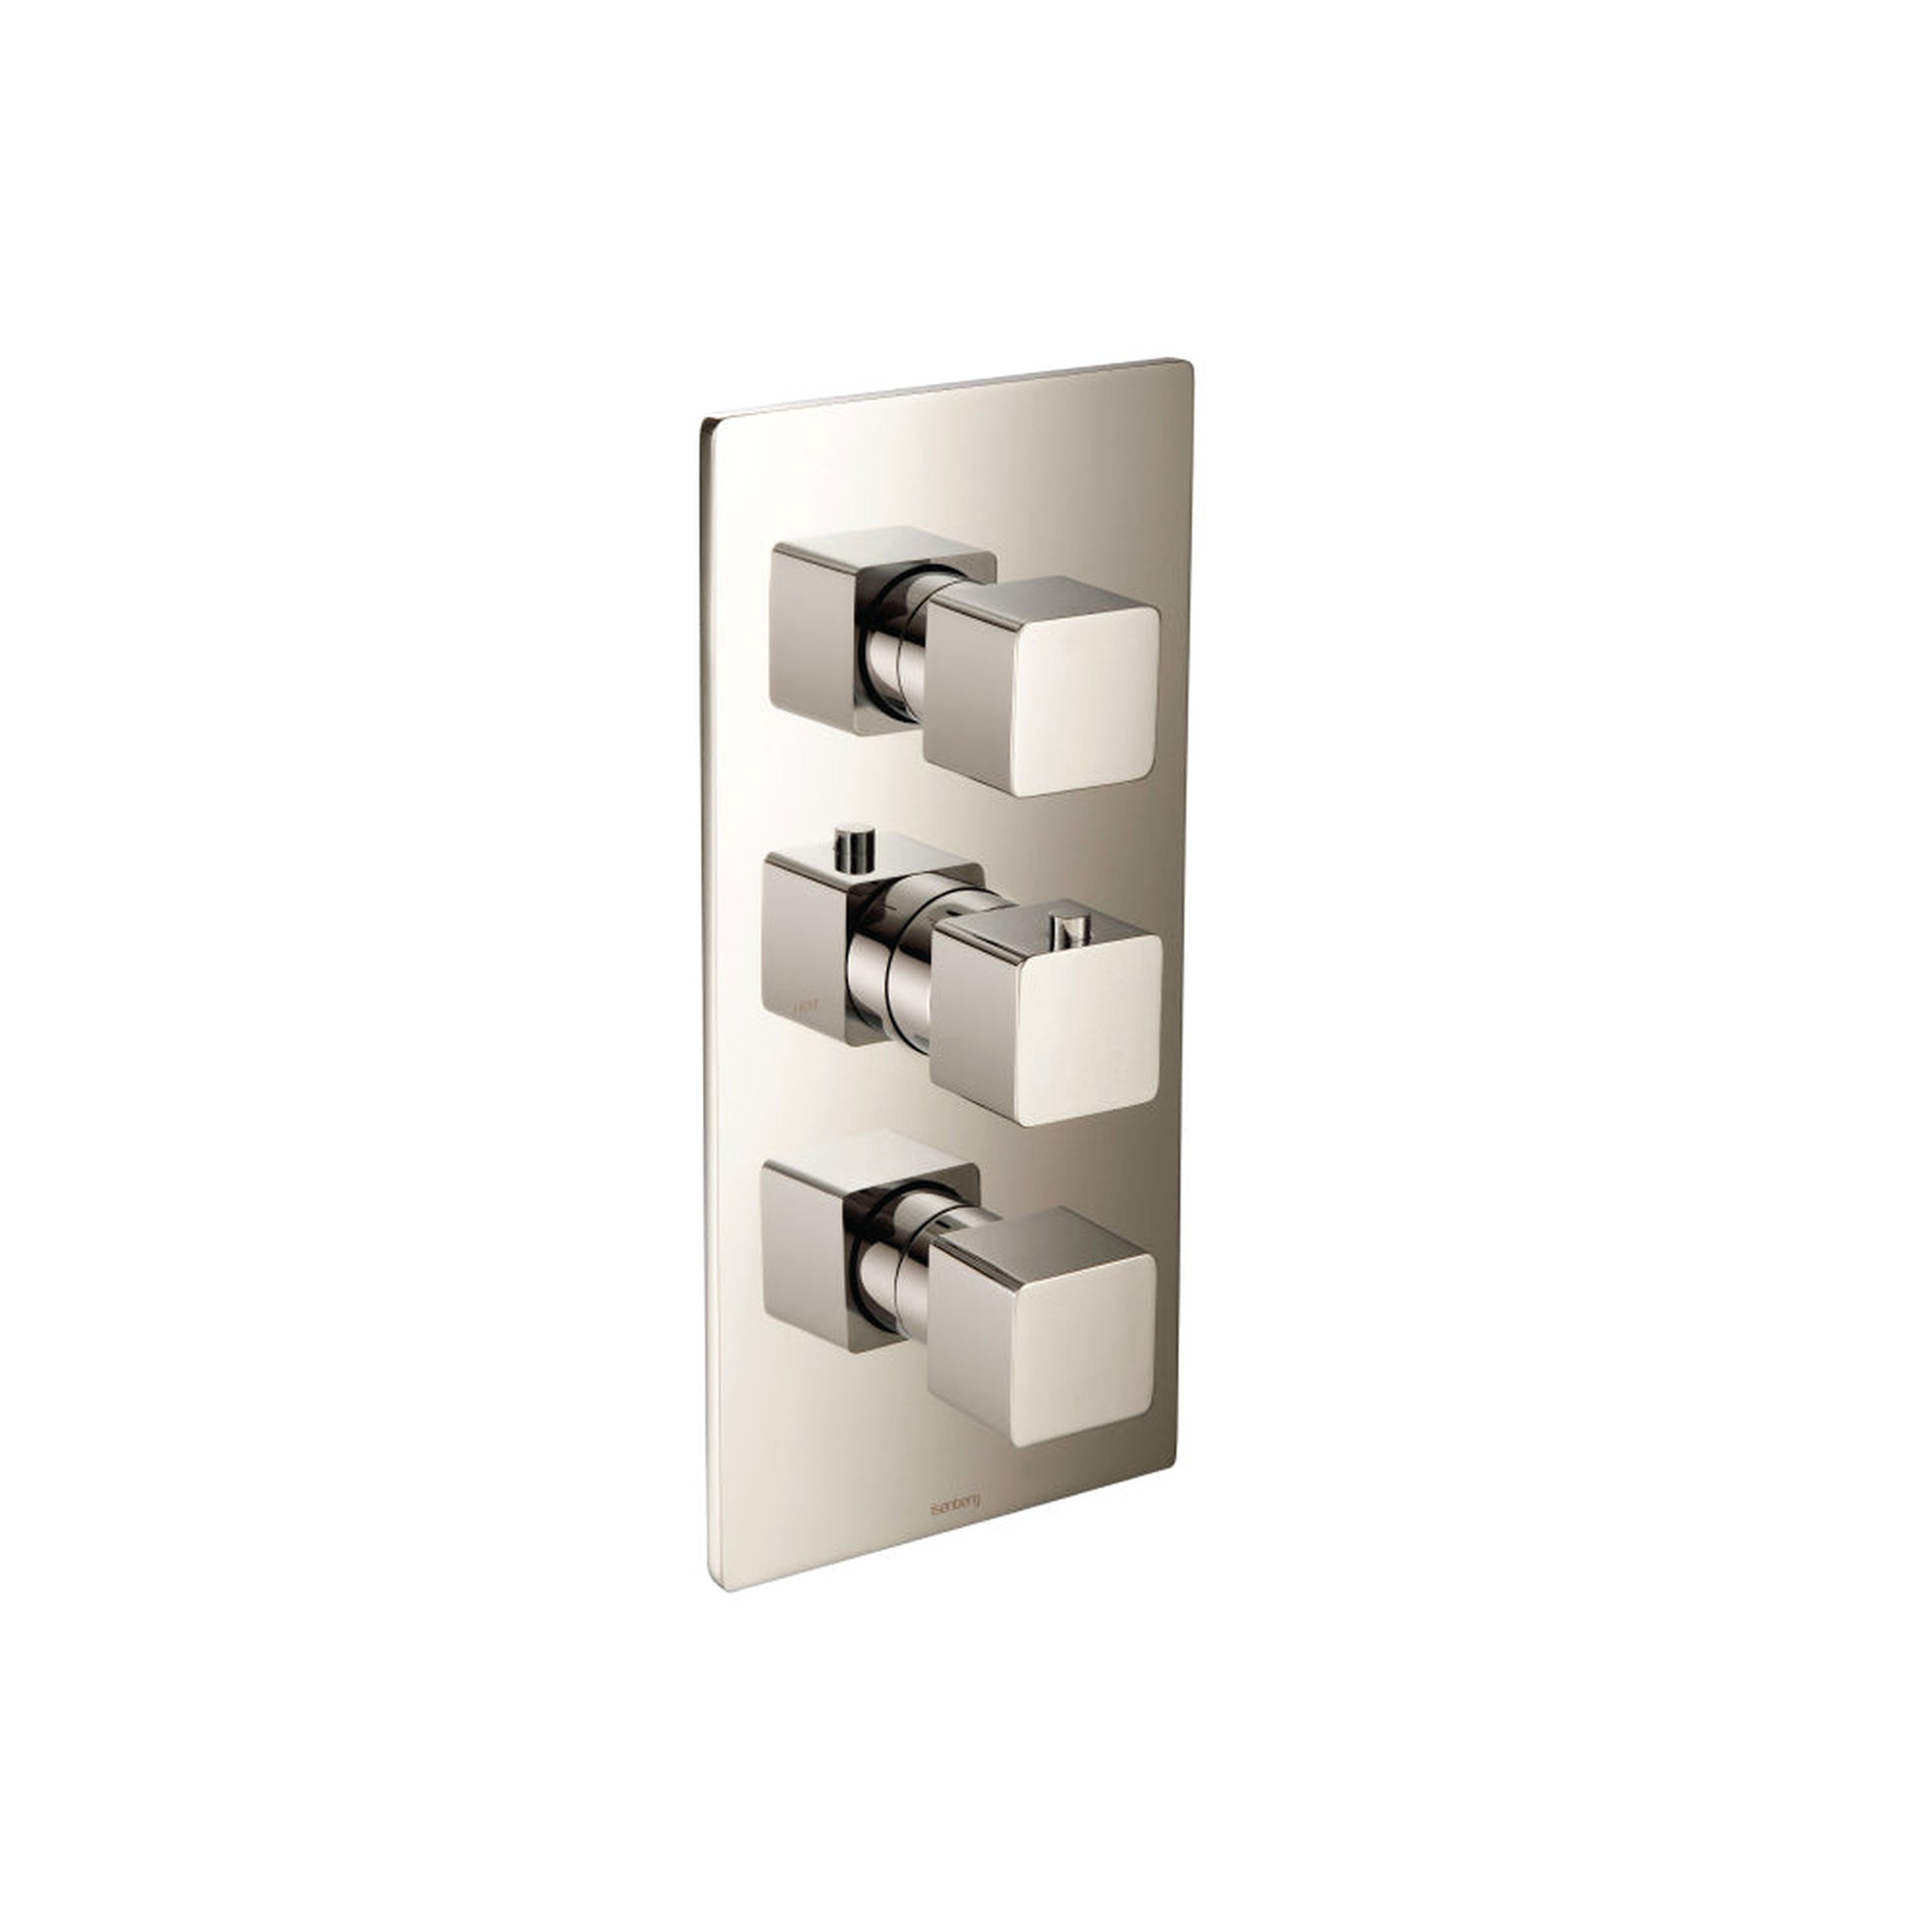 Isenberg Serie 196 3/4" Four Output Thermostatic Valve and Trim in Polished Nickel